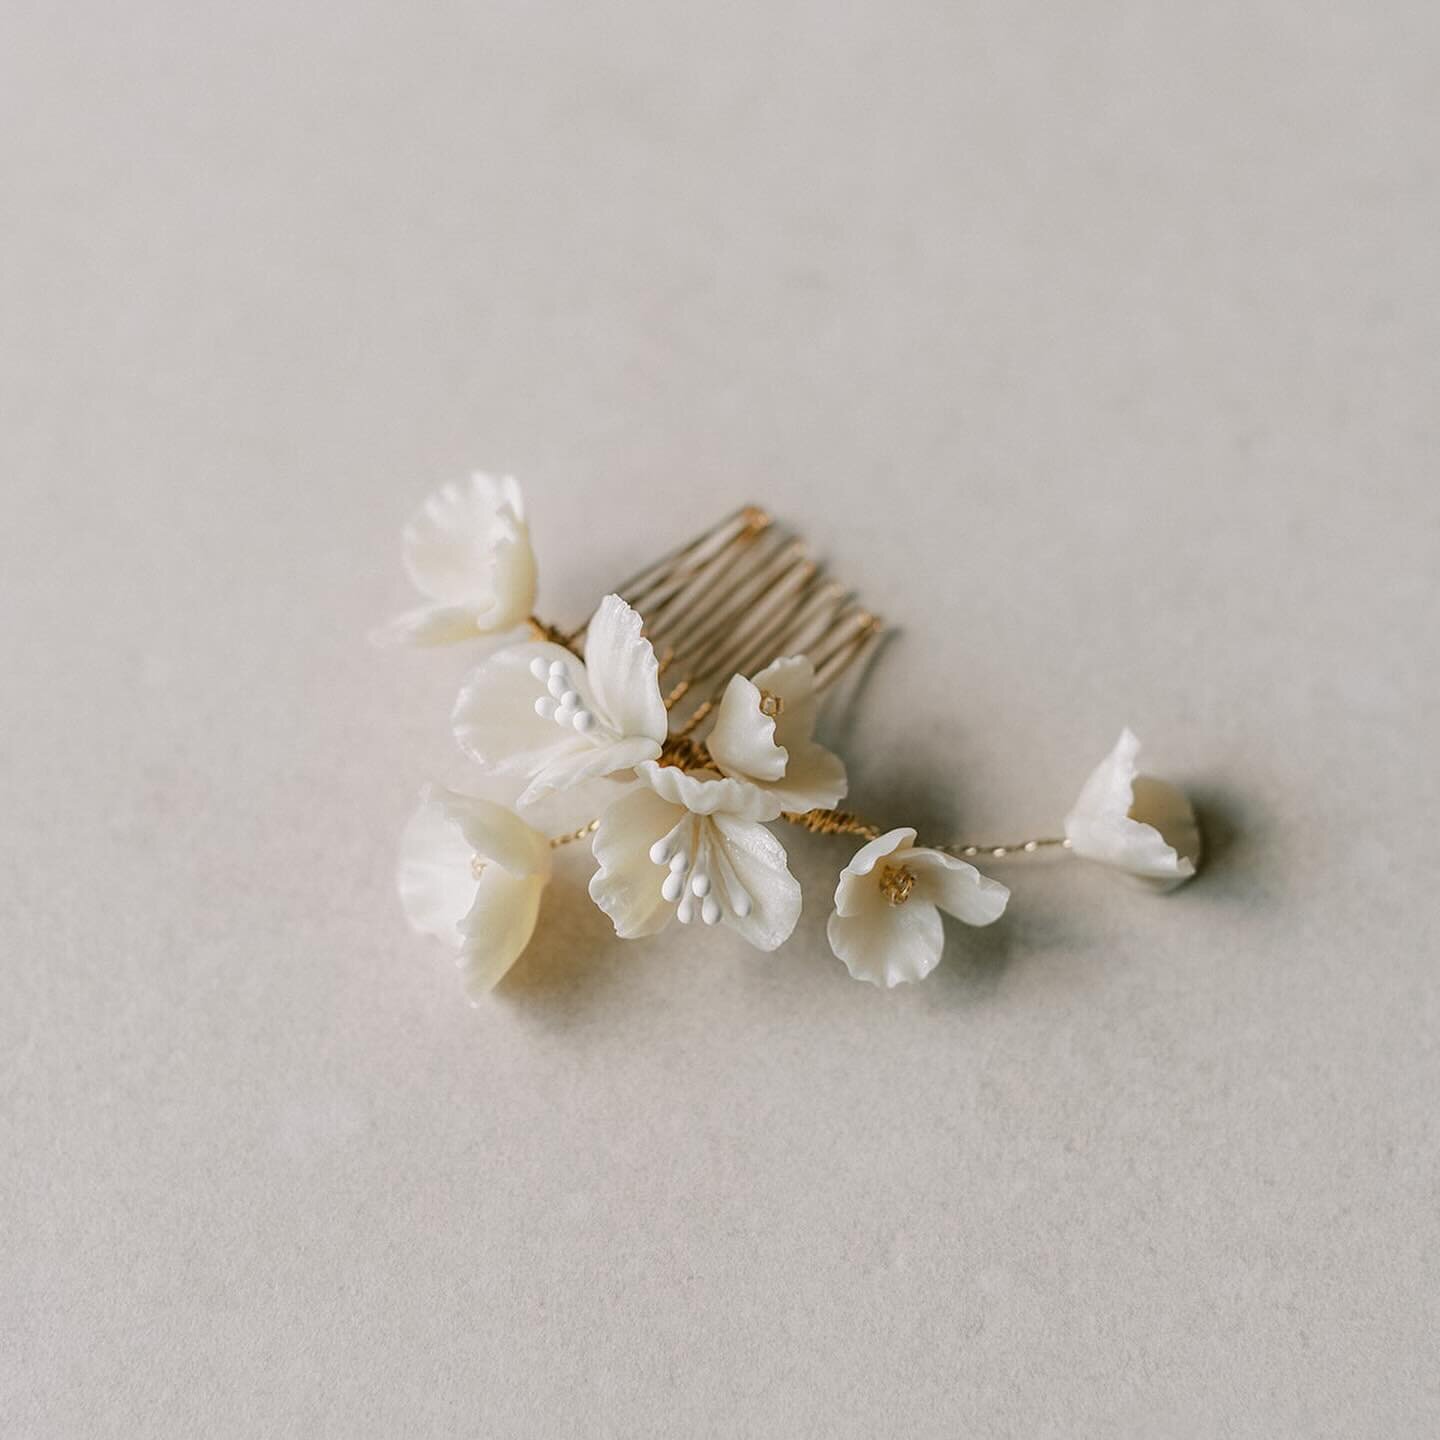 Sculptural, Poetic Blooms&mdash;&mdash; spring &amp; summer brides, these are calling your name x
.
.
Find these beauties + more of our most artful, elegant headpieces at @simplywhitebridalny 🤍
.
.
NOW - MAR 19